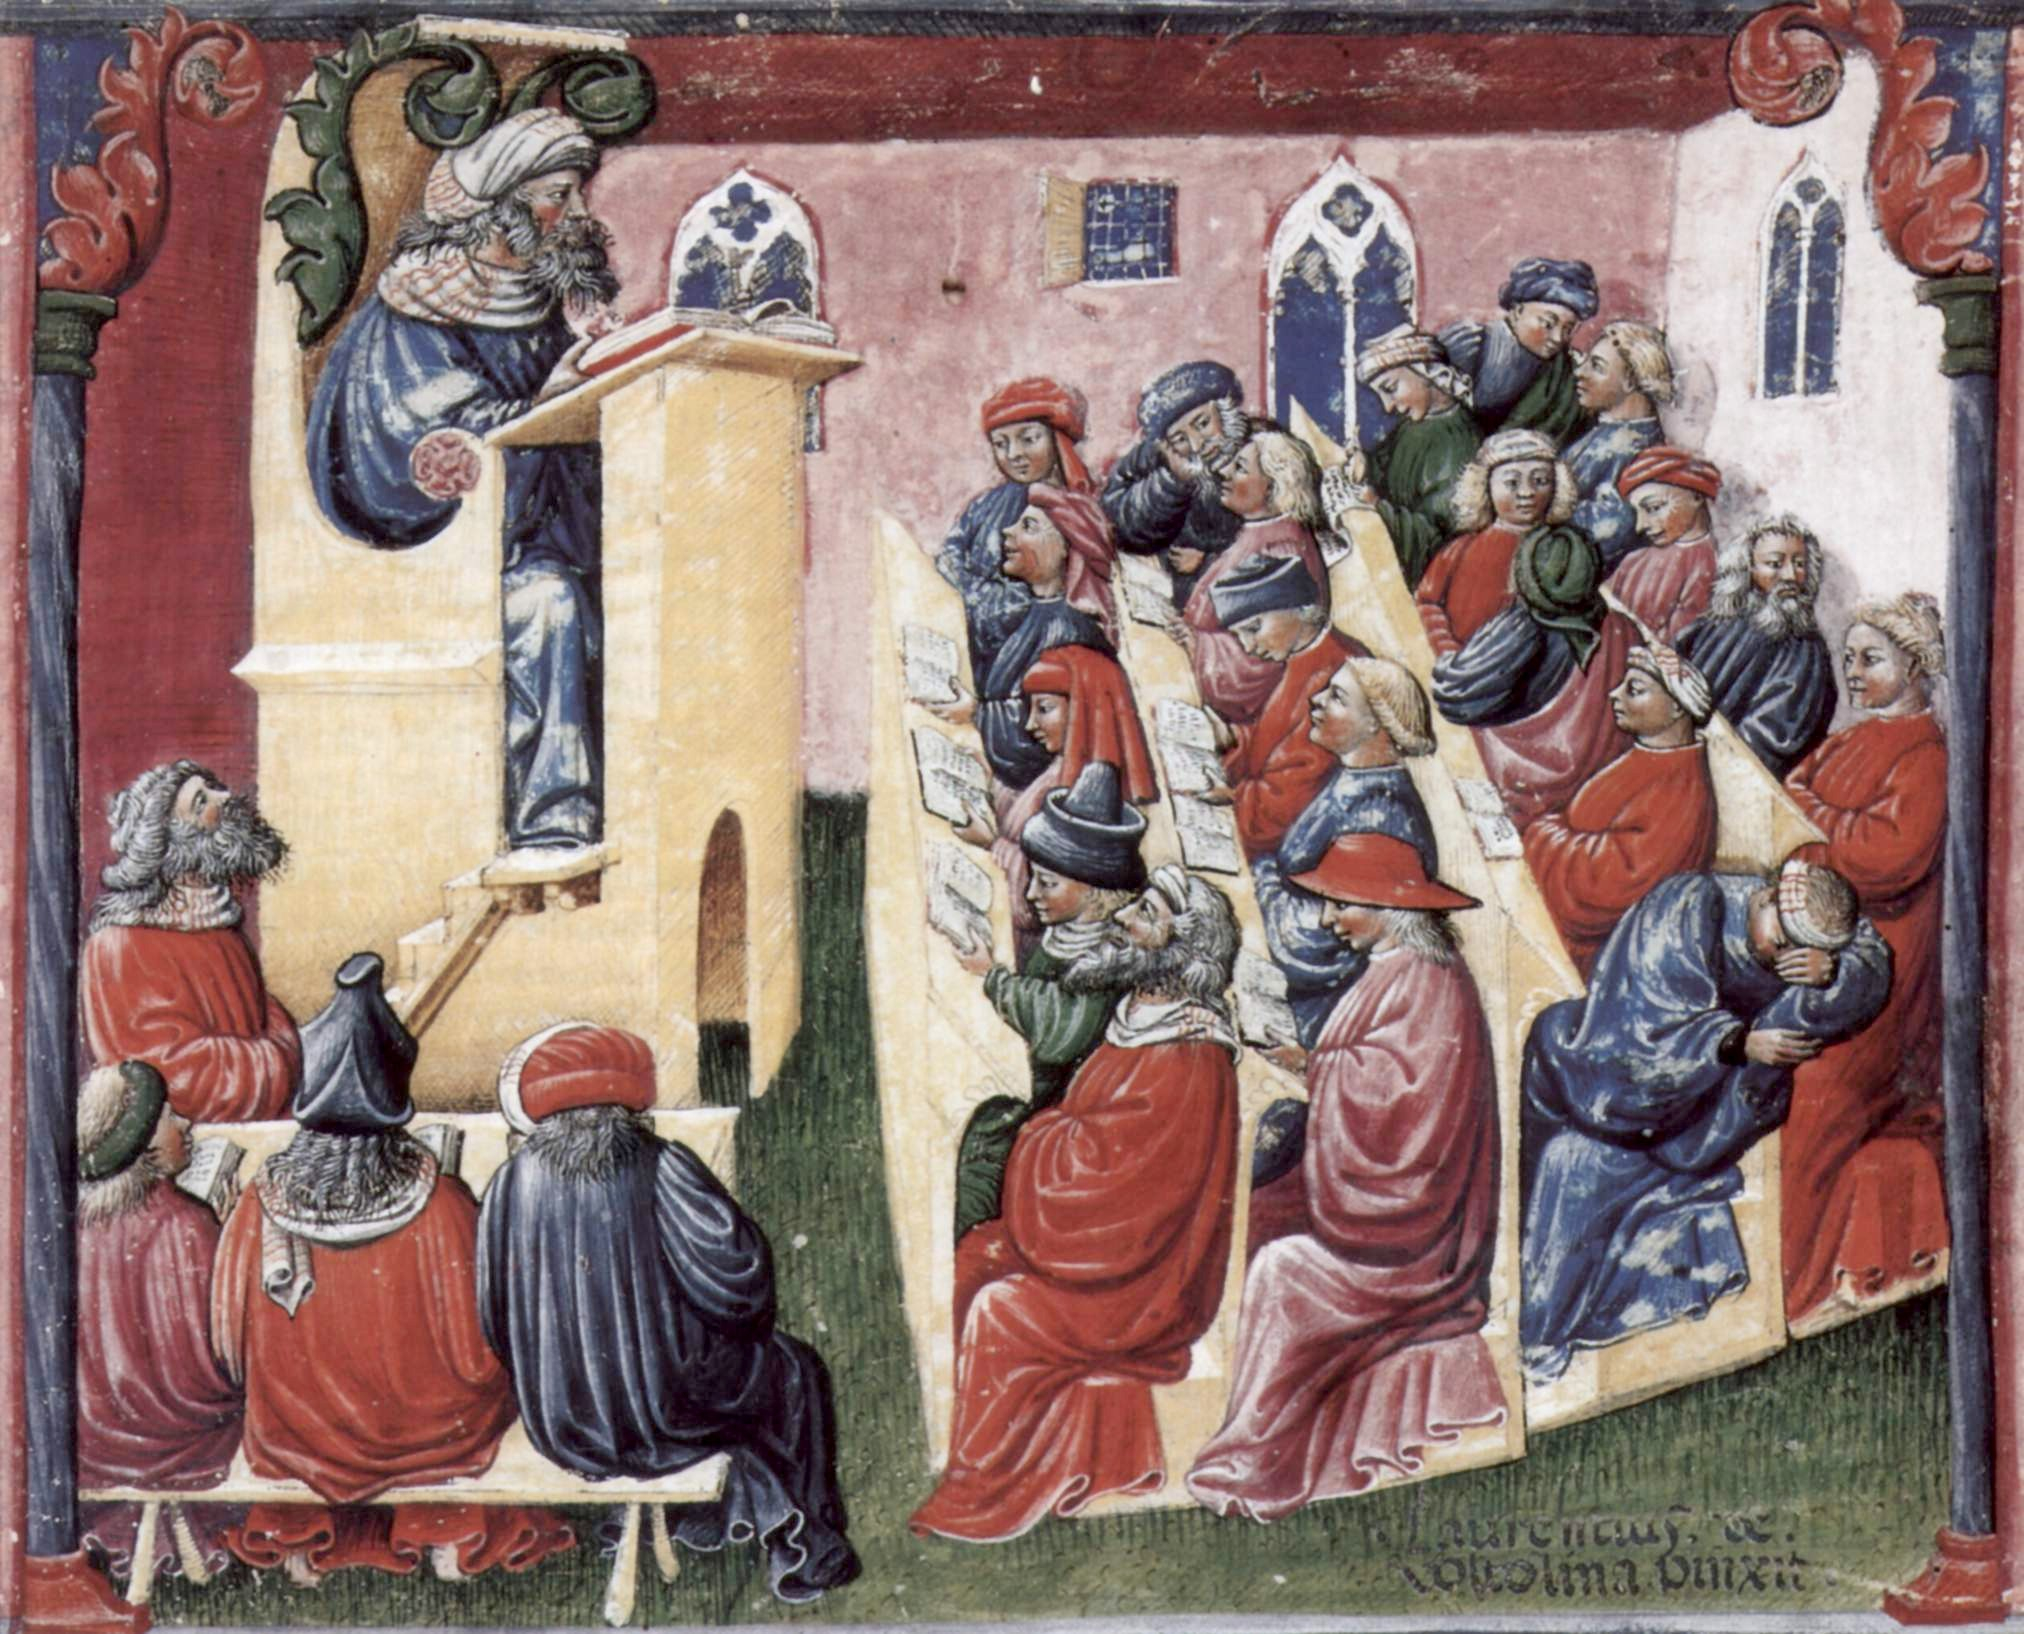 Detail of a fourteenth century image showing Henry of Germany delivering a lecture to University Students in Bologna by Laurentius de Voltolina in the Liber ethicorum des Henricus de Alemannia, preserved in the Kupferstichkabinett SMPK, Staatliche Museen, Pressiischer Kulturbesitz, Min. 1233. 
Please click to view entire image.